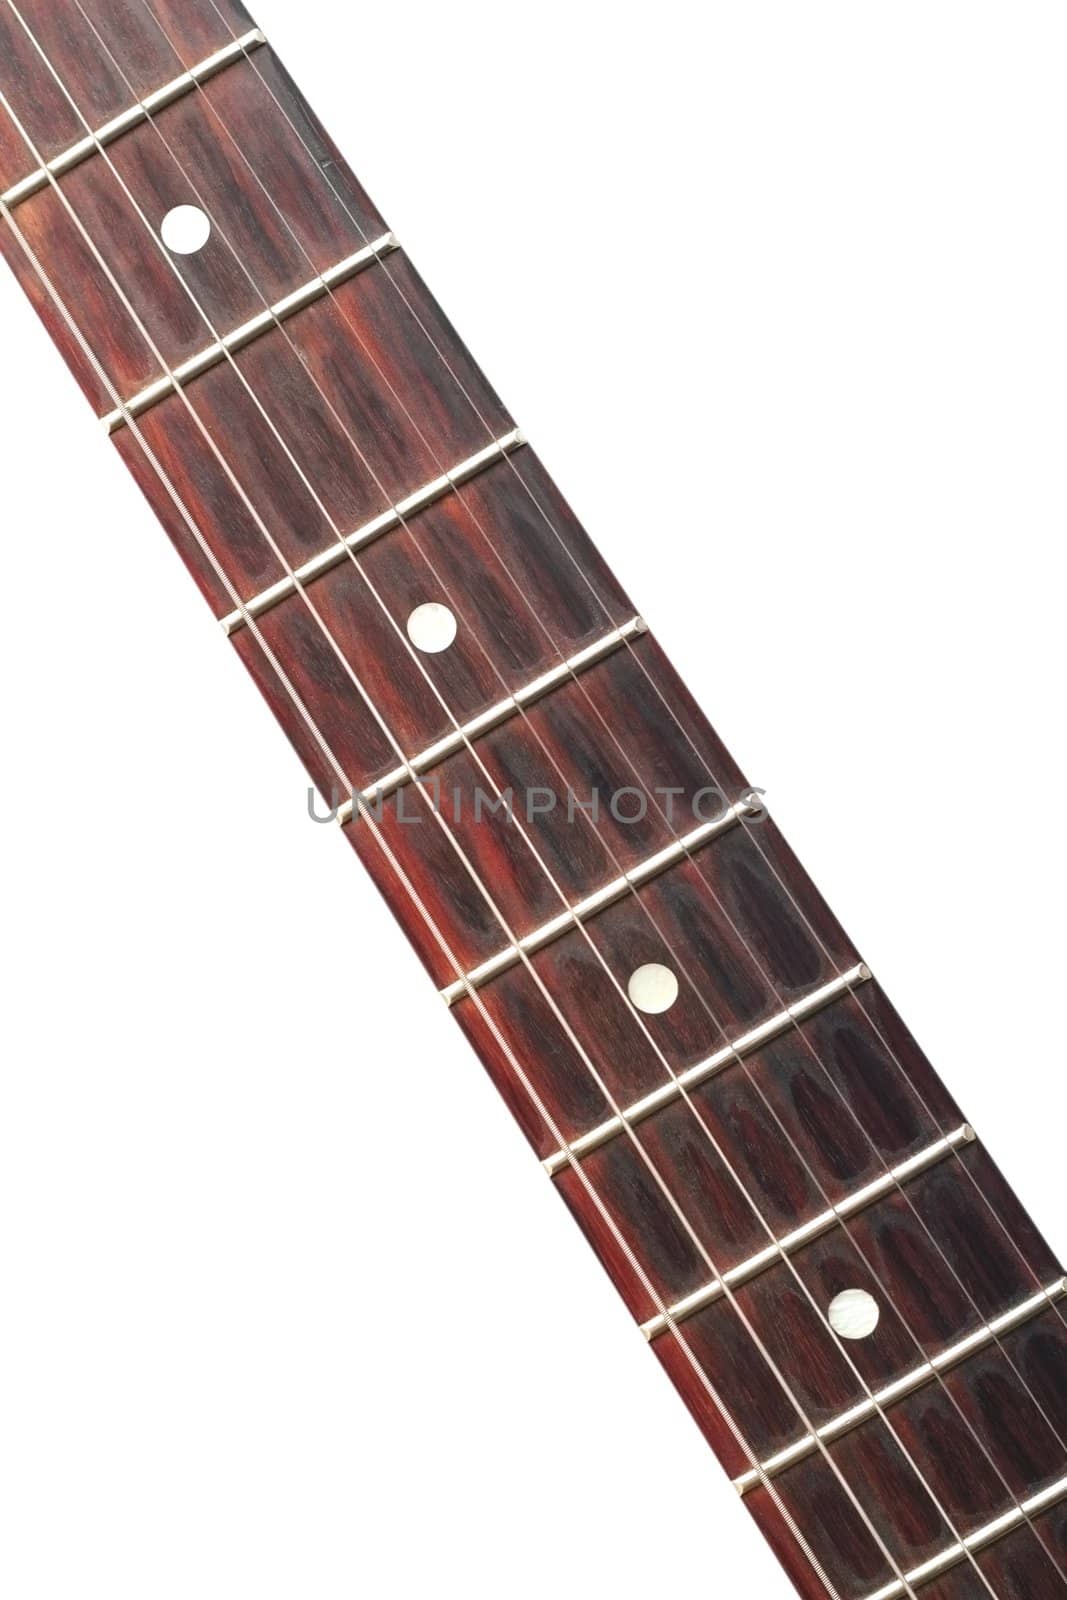 old used electric guitar neck isolated over white background